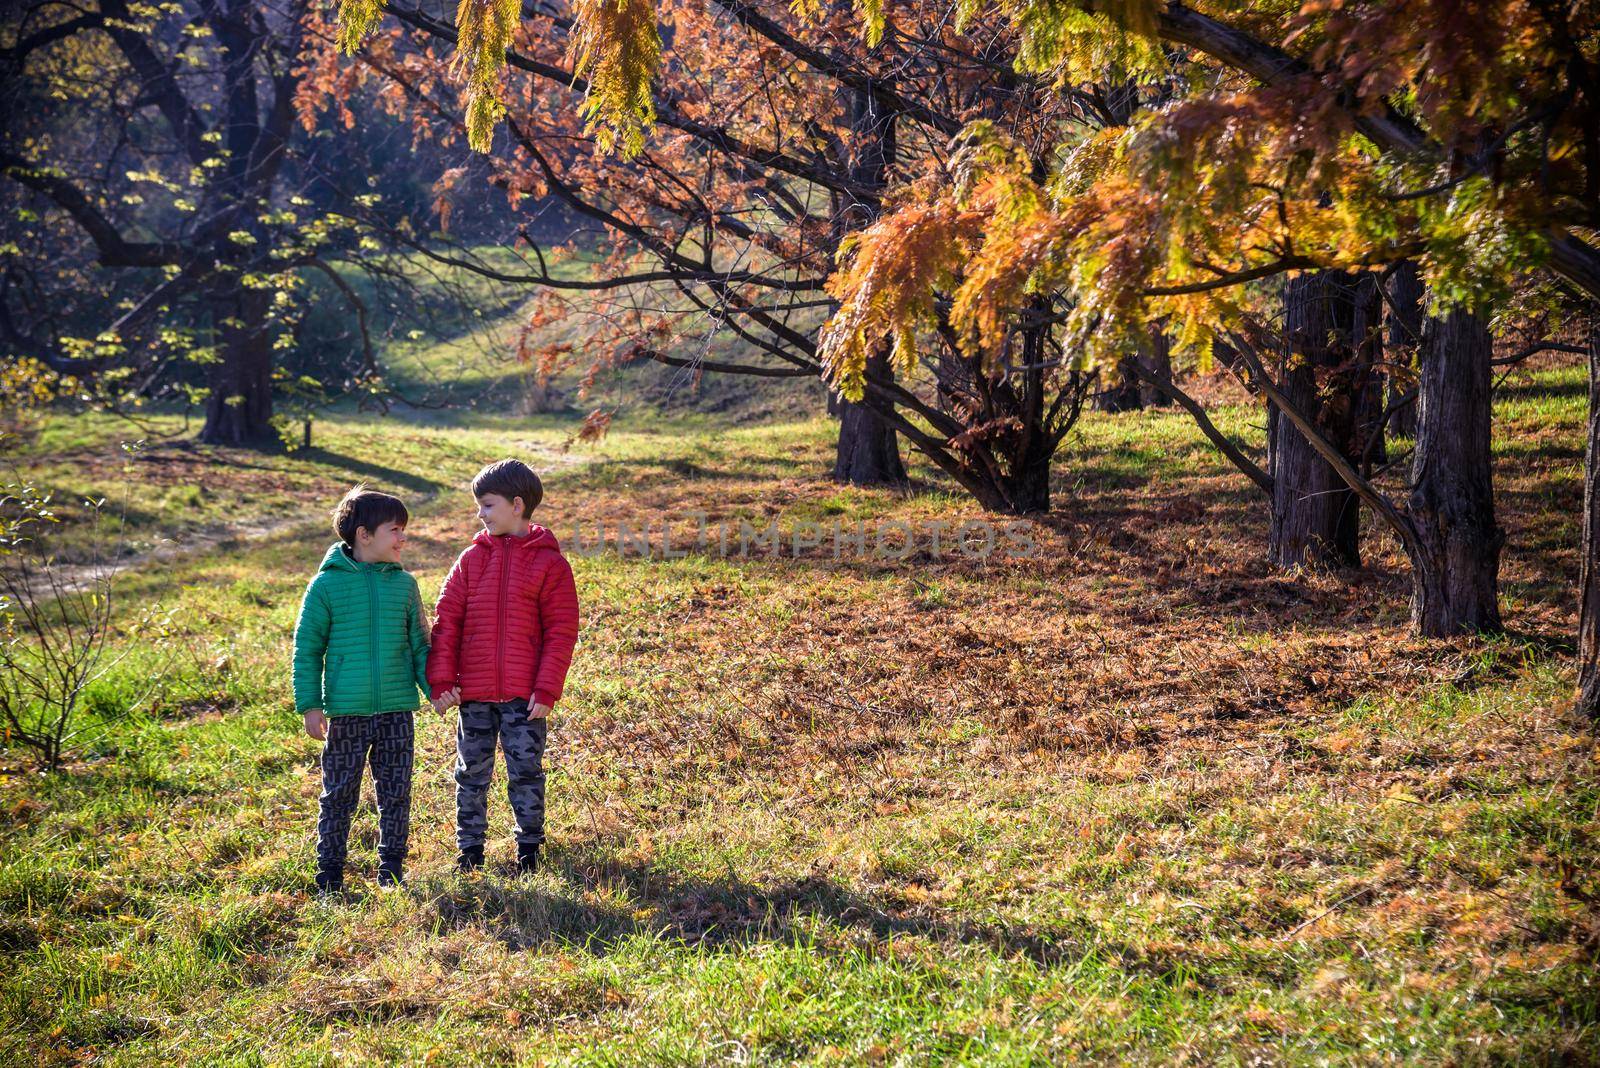 Two boys are running in the autumn forest. Two sibling brother boys are best friends spend time together on nature. Rest outdoors and friendship concept.